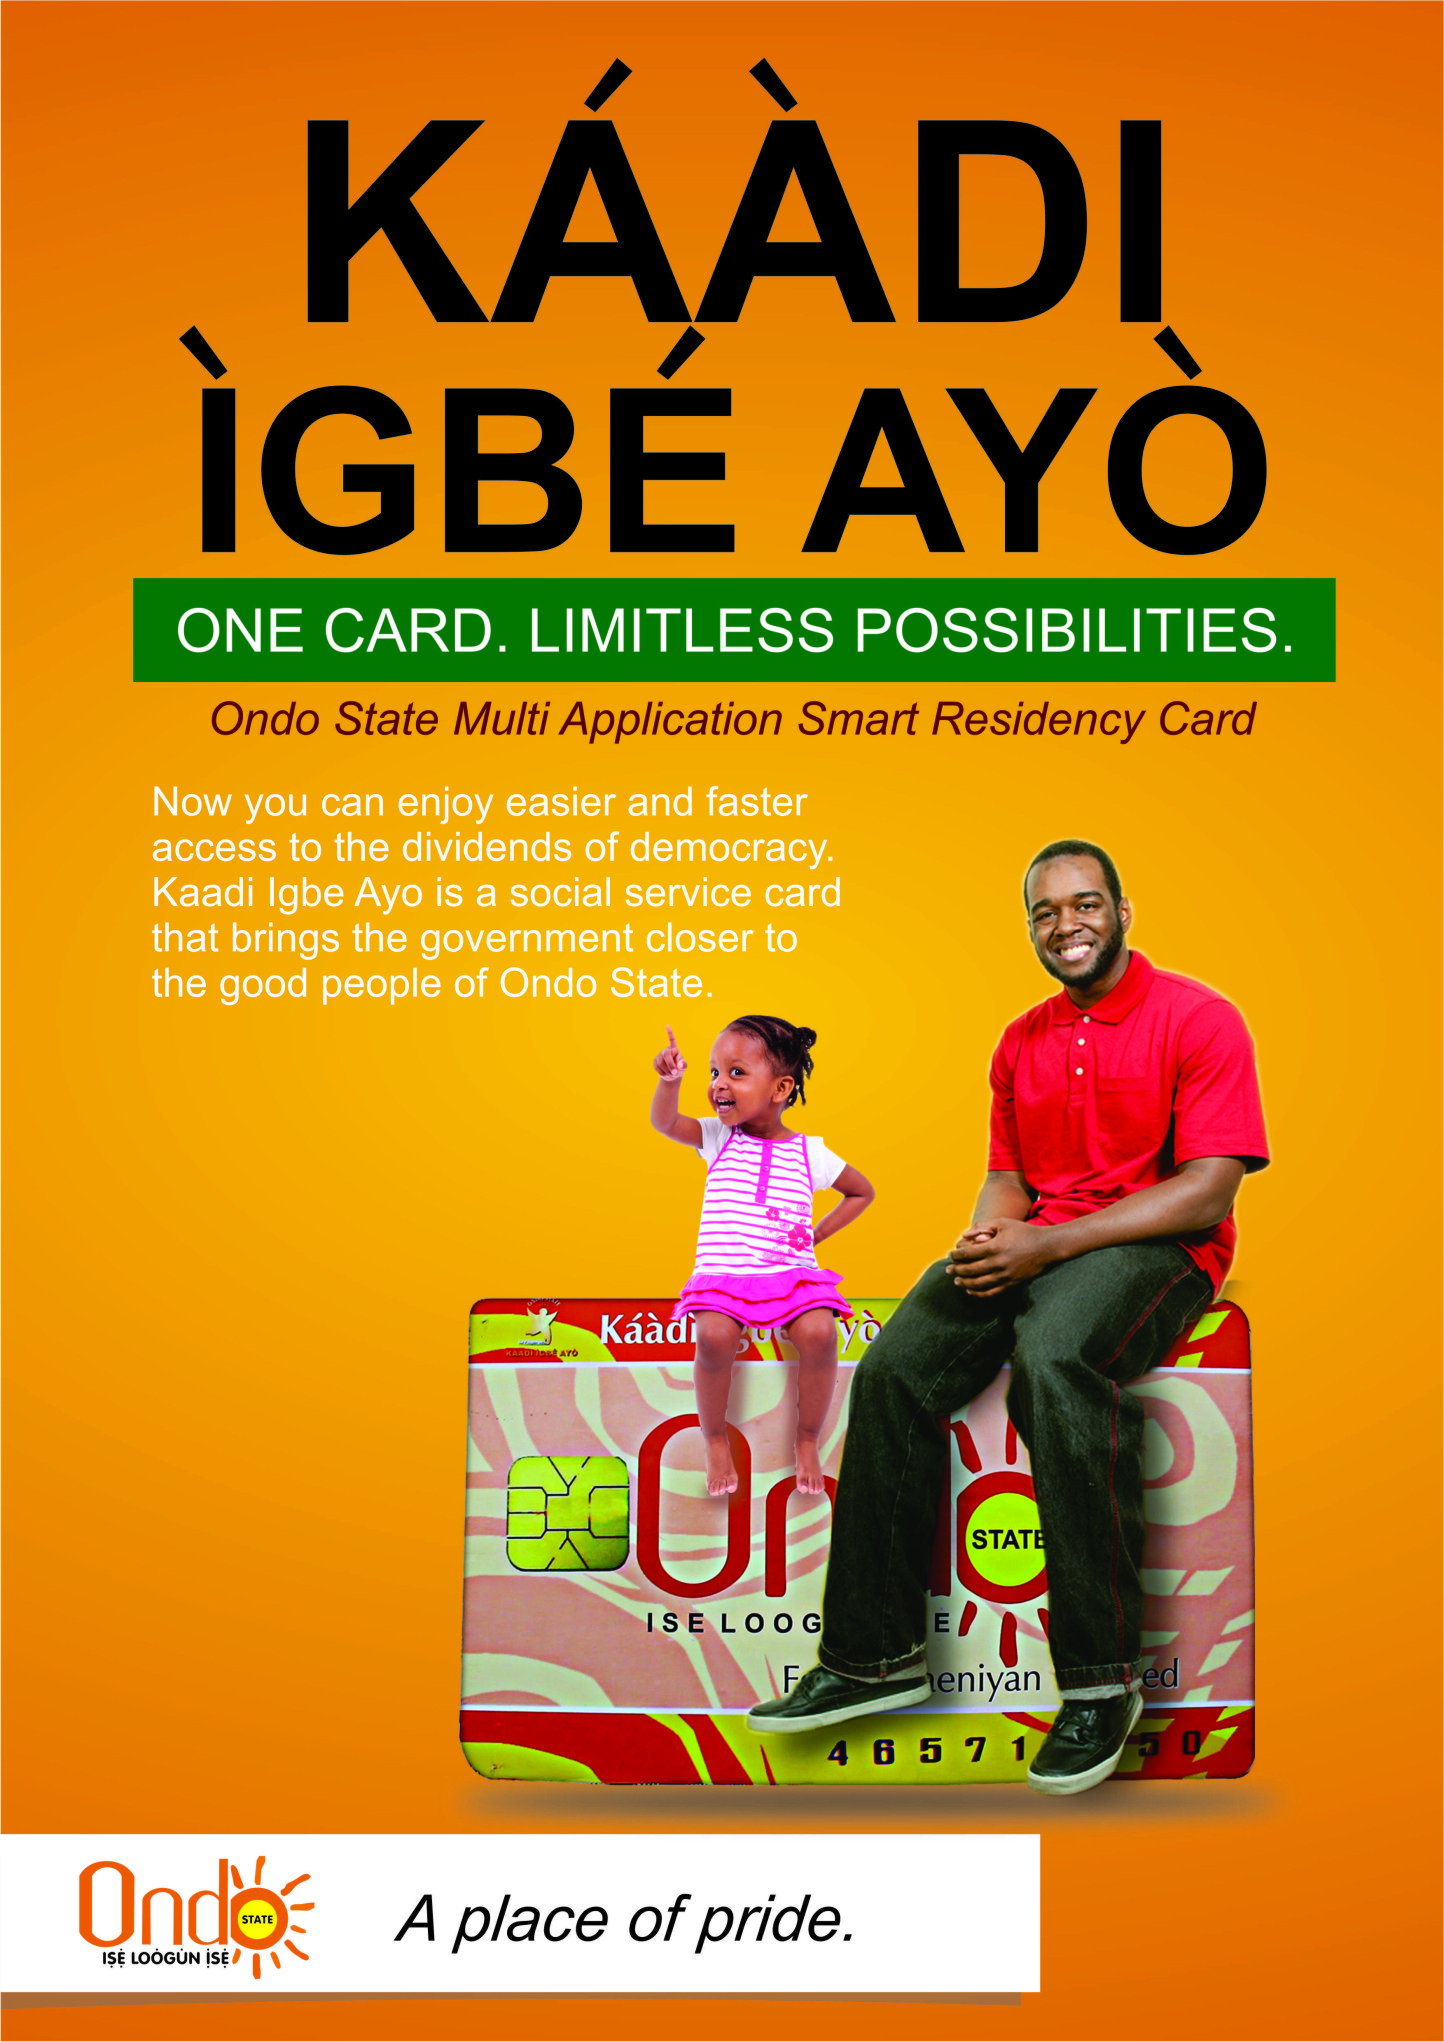 A promotional poster for Kaadi Igbe Ayo in Ondo State